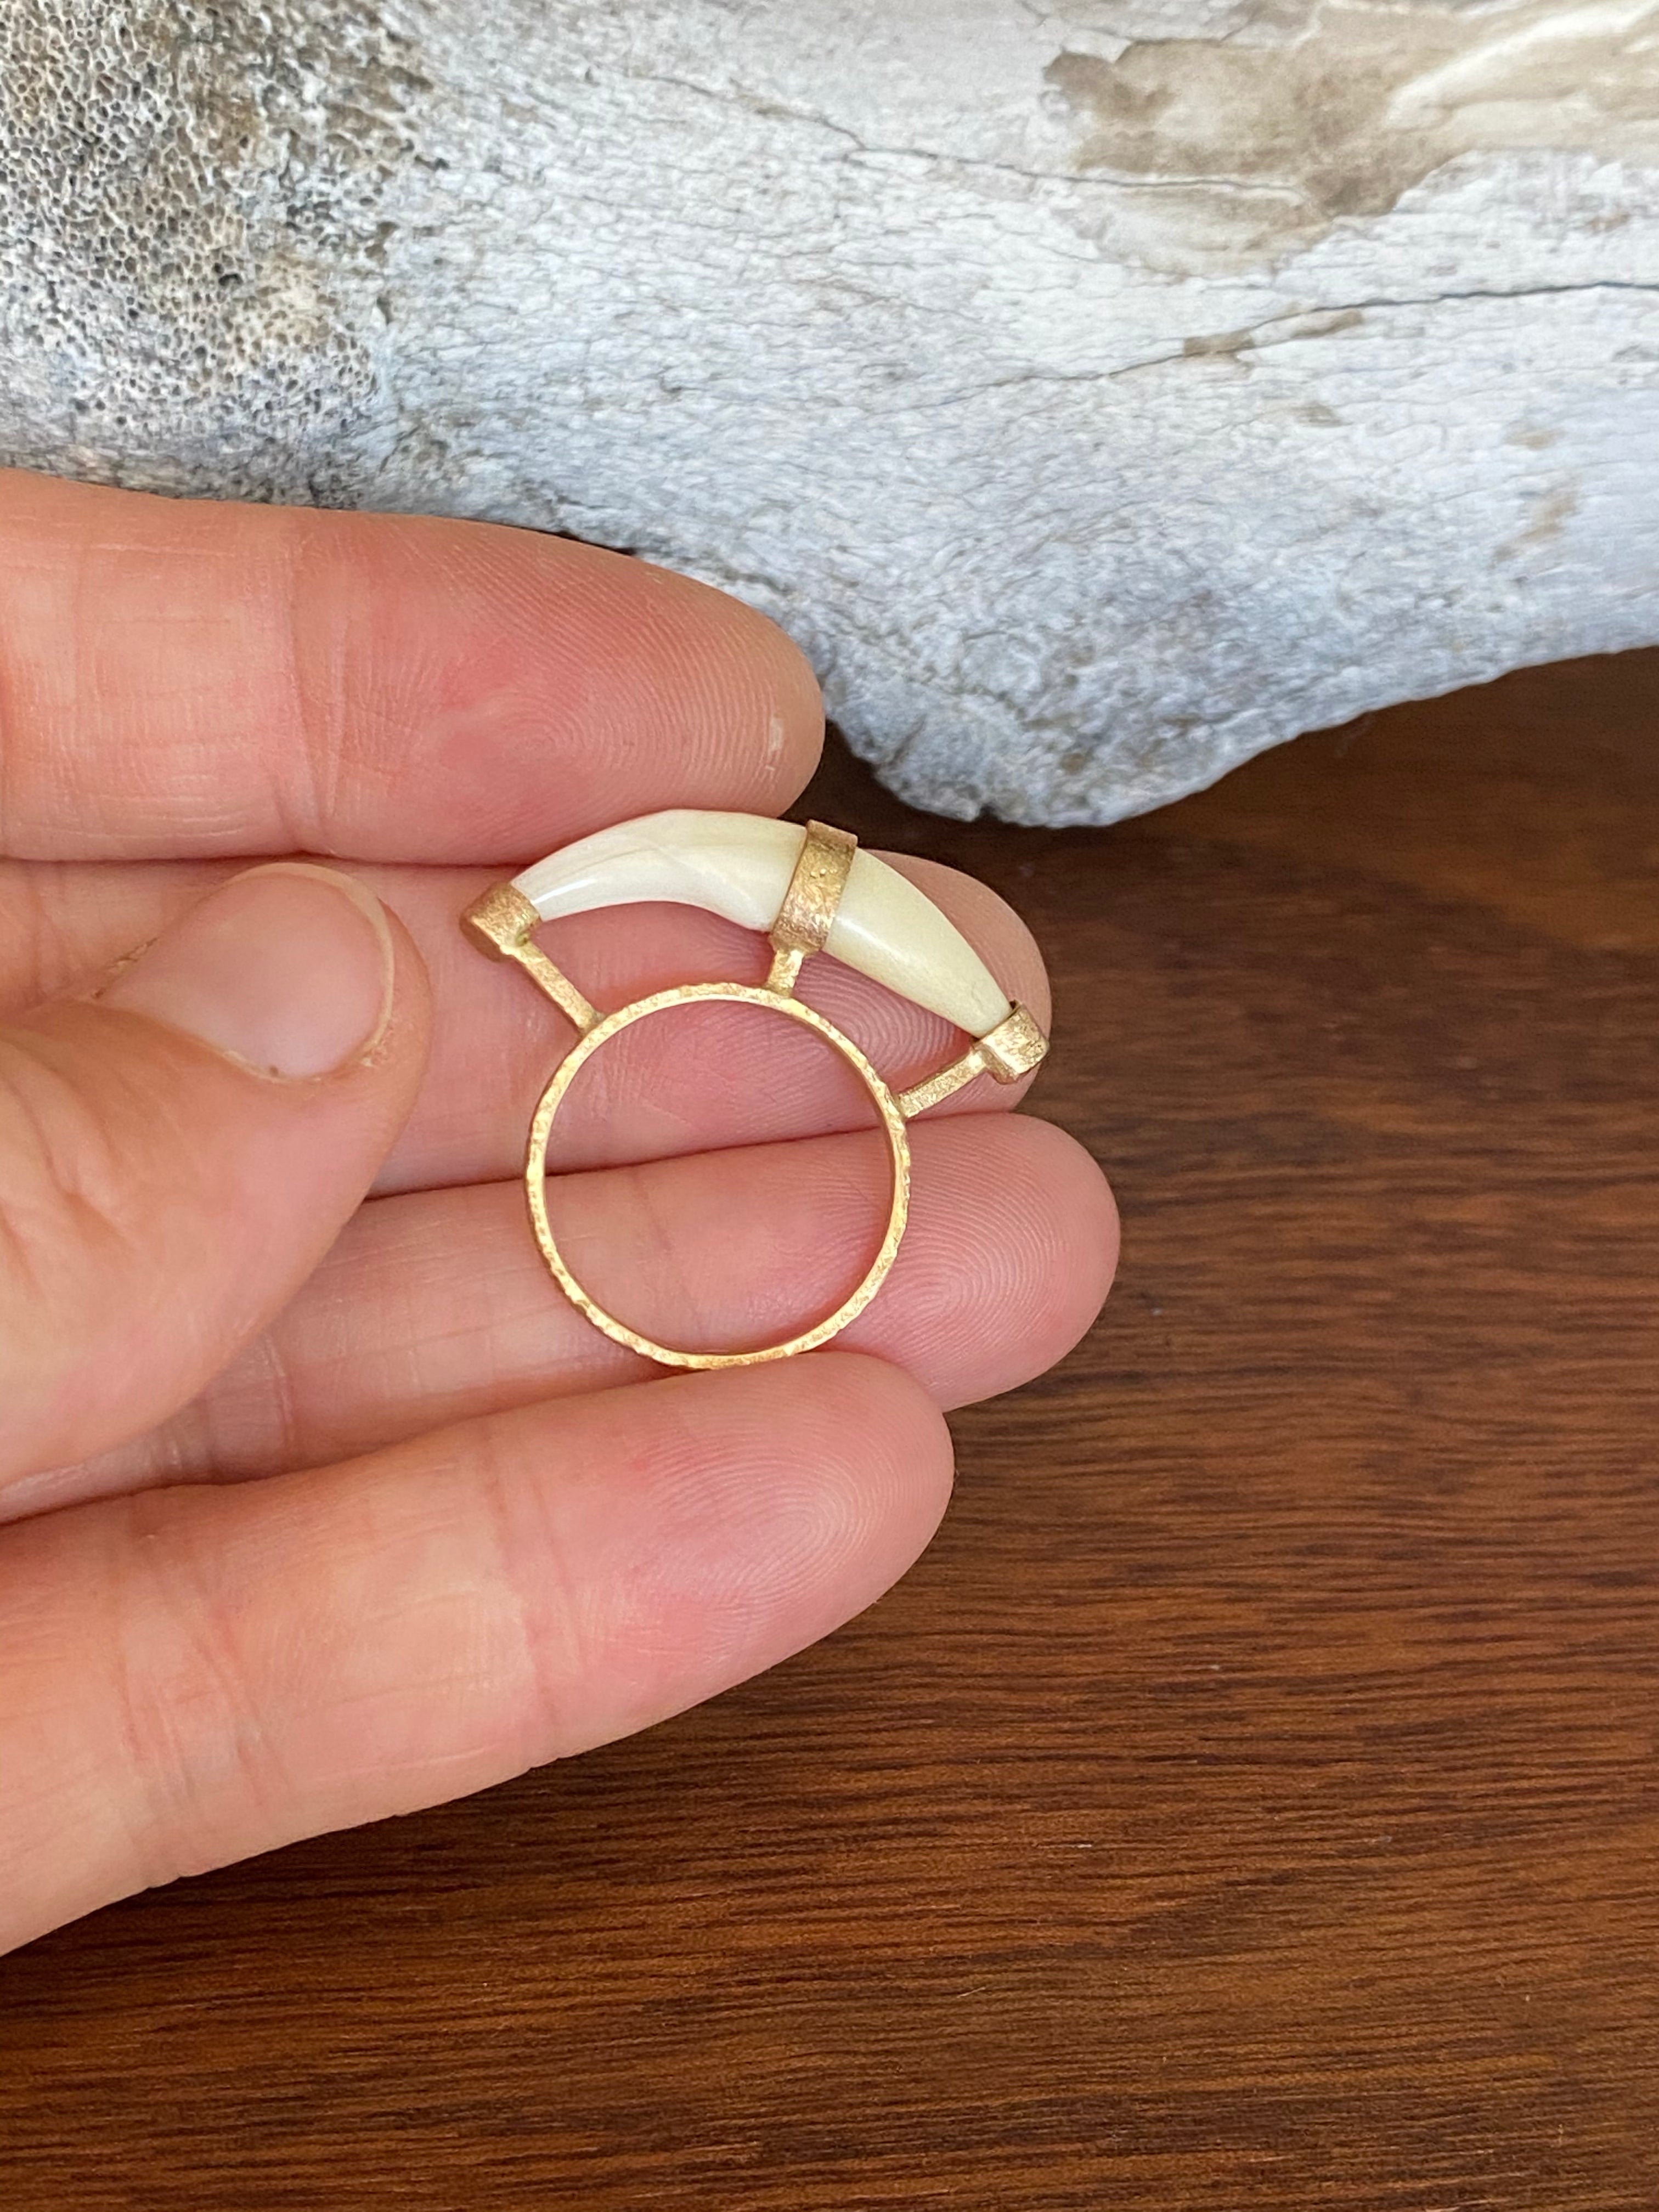 M. Rose Studio- Arched Tooth Ring